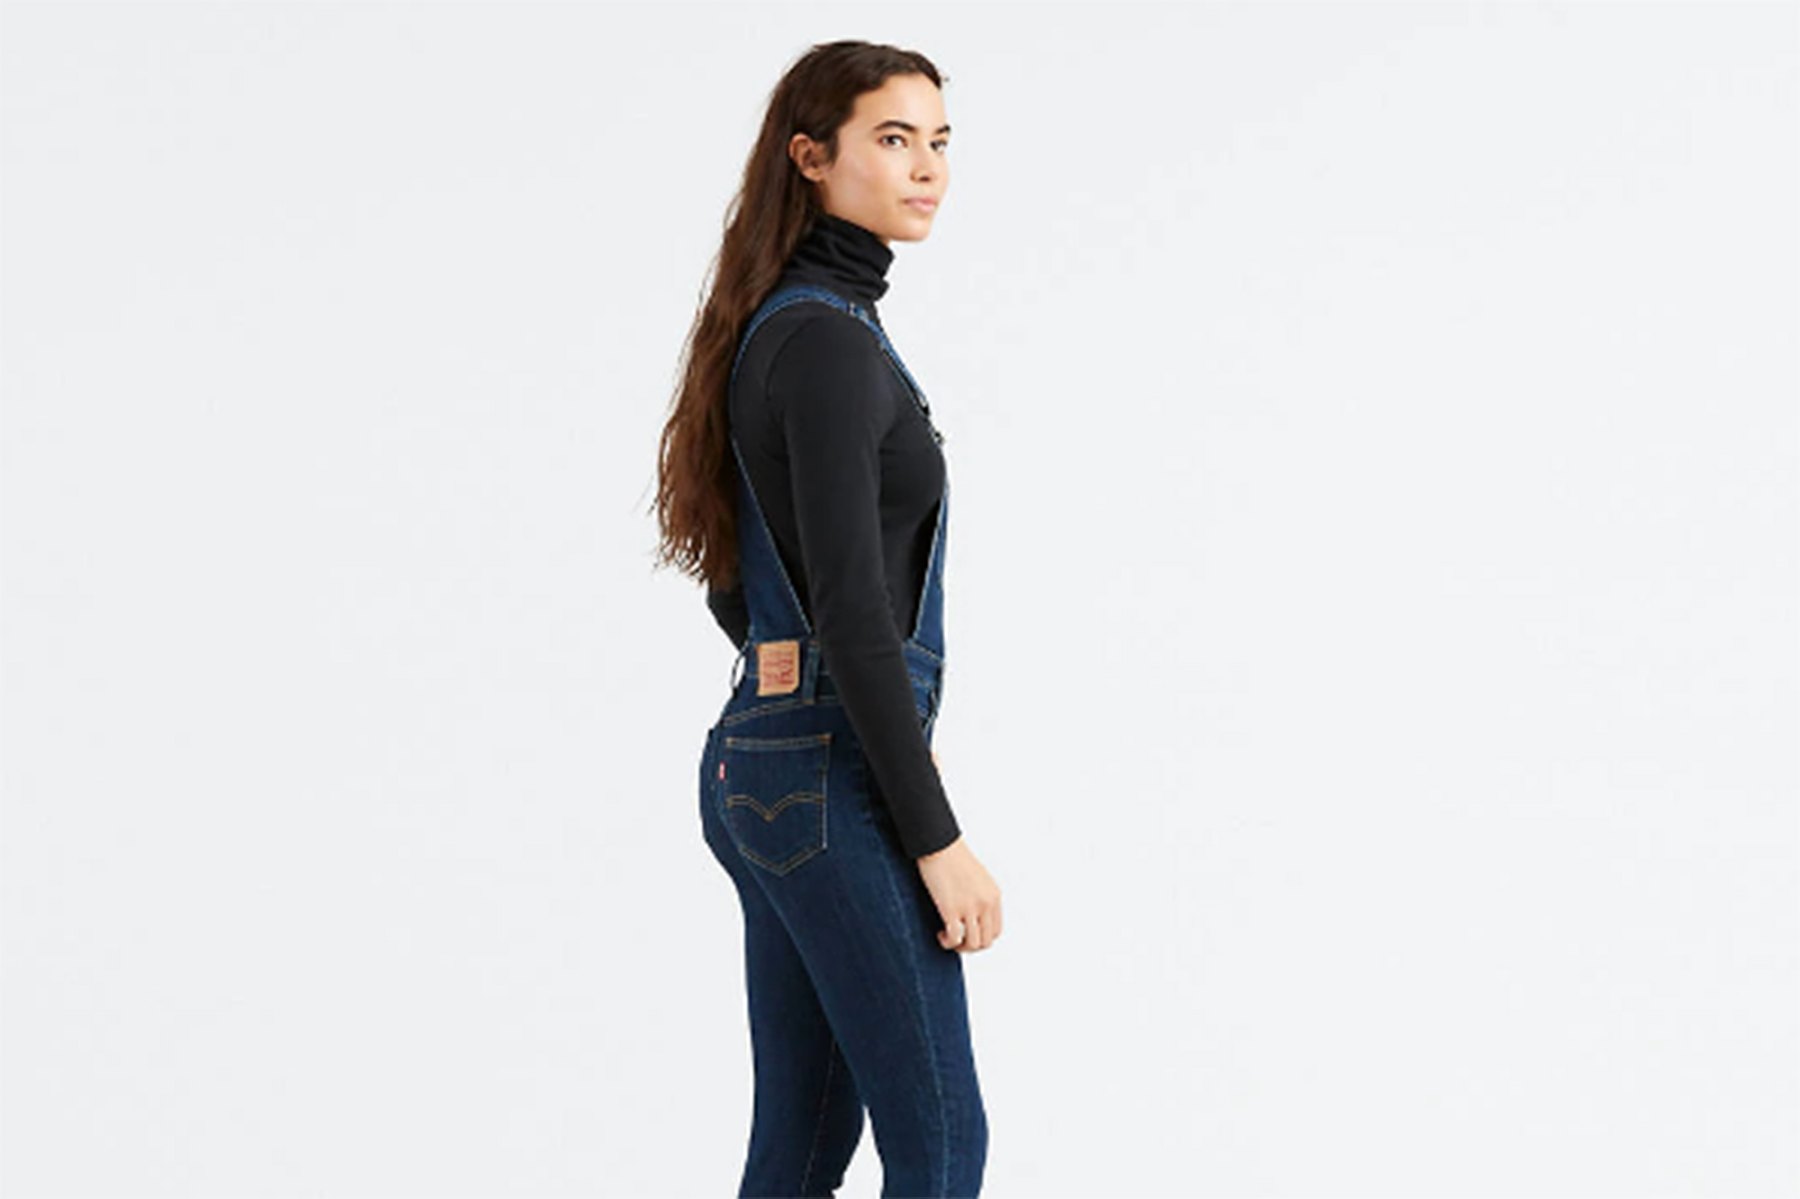 The Skinny Levi’s Overalls You Can’t Go Through Fall Without